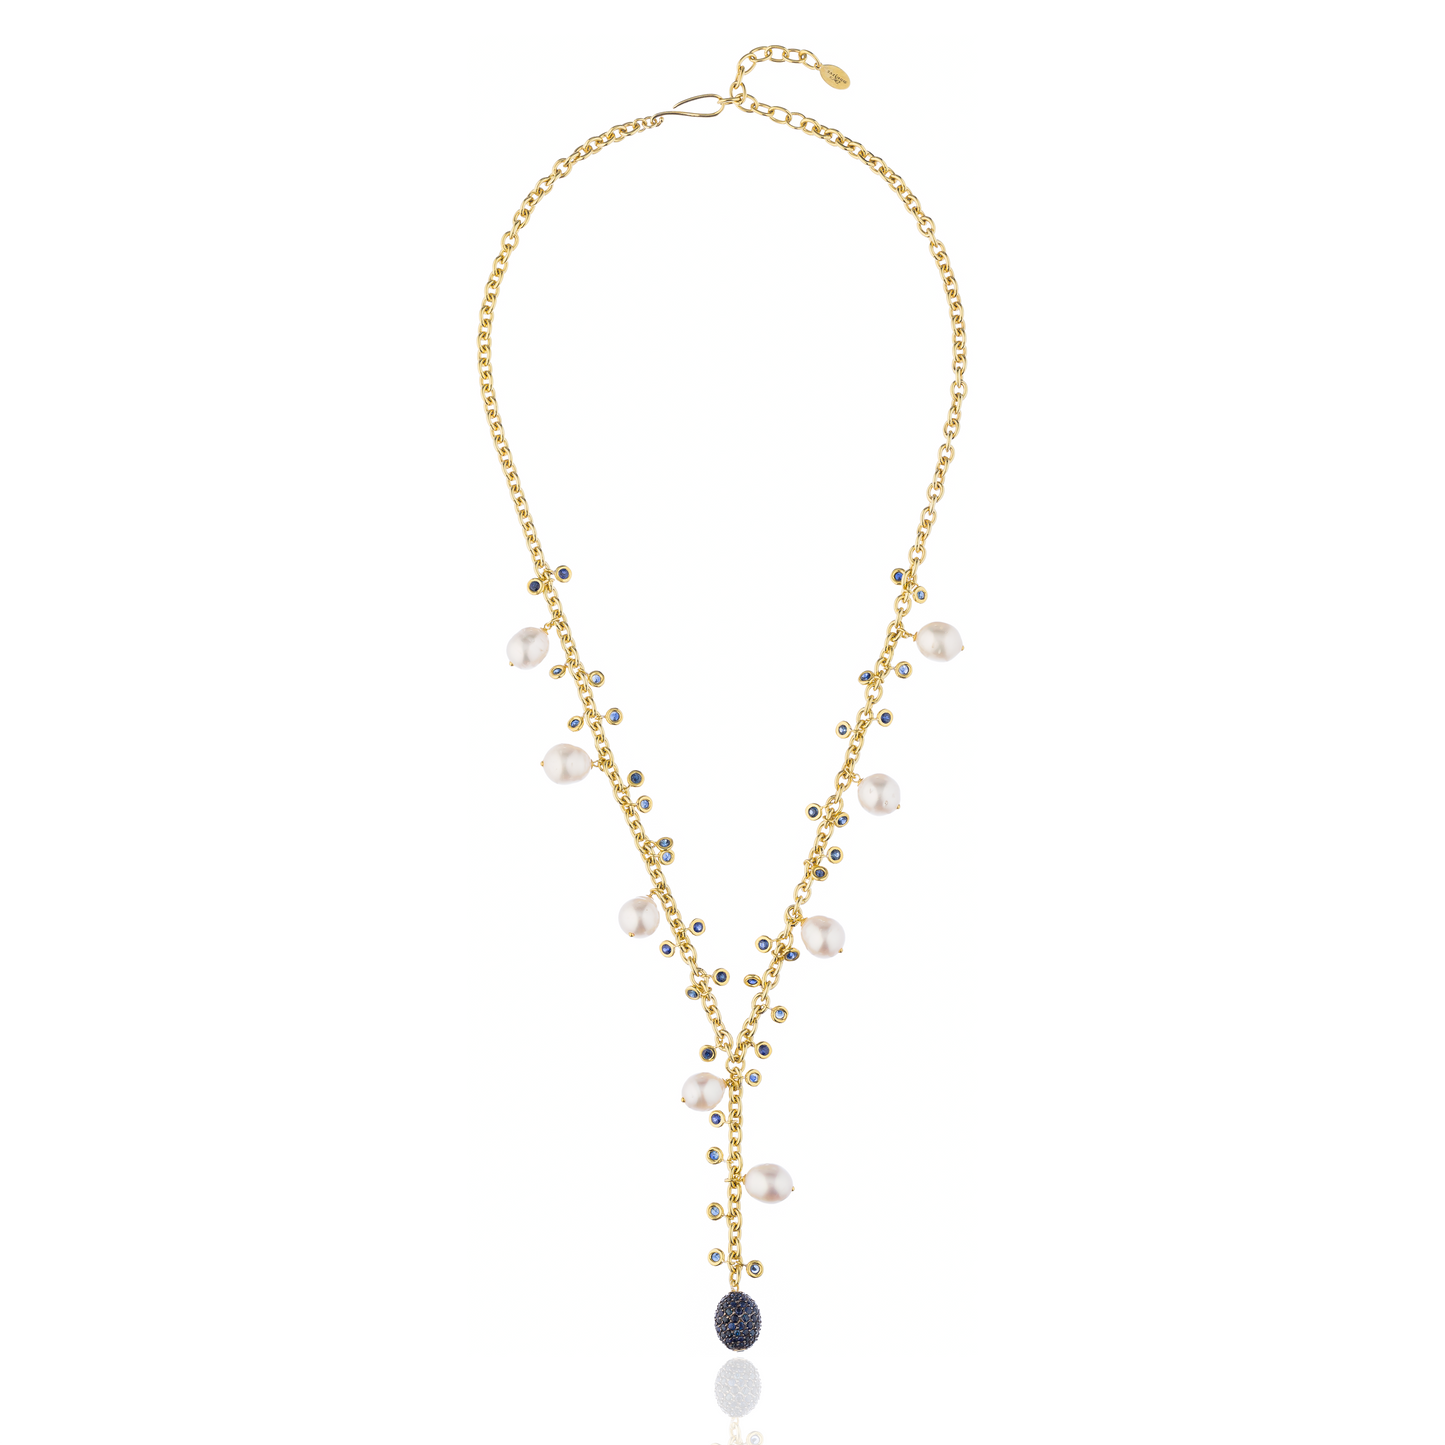 925 Silver Necklace with South Sea Pearls & Blue Sapphires